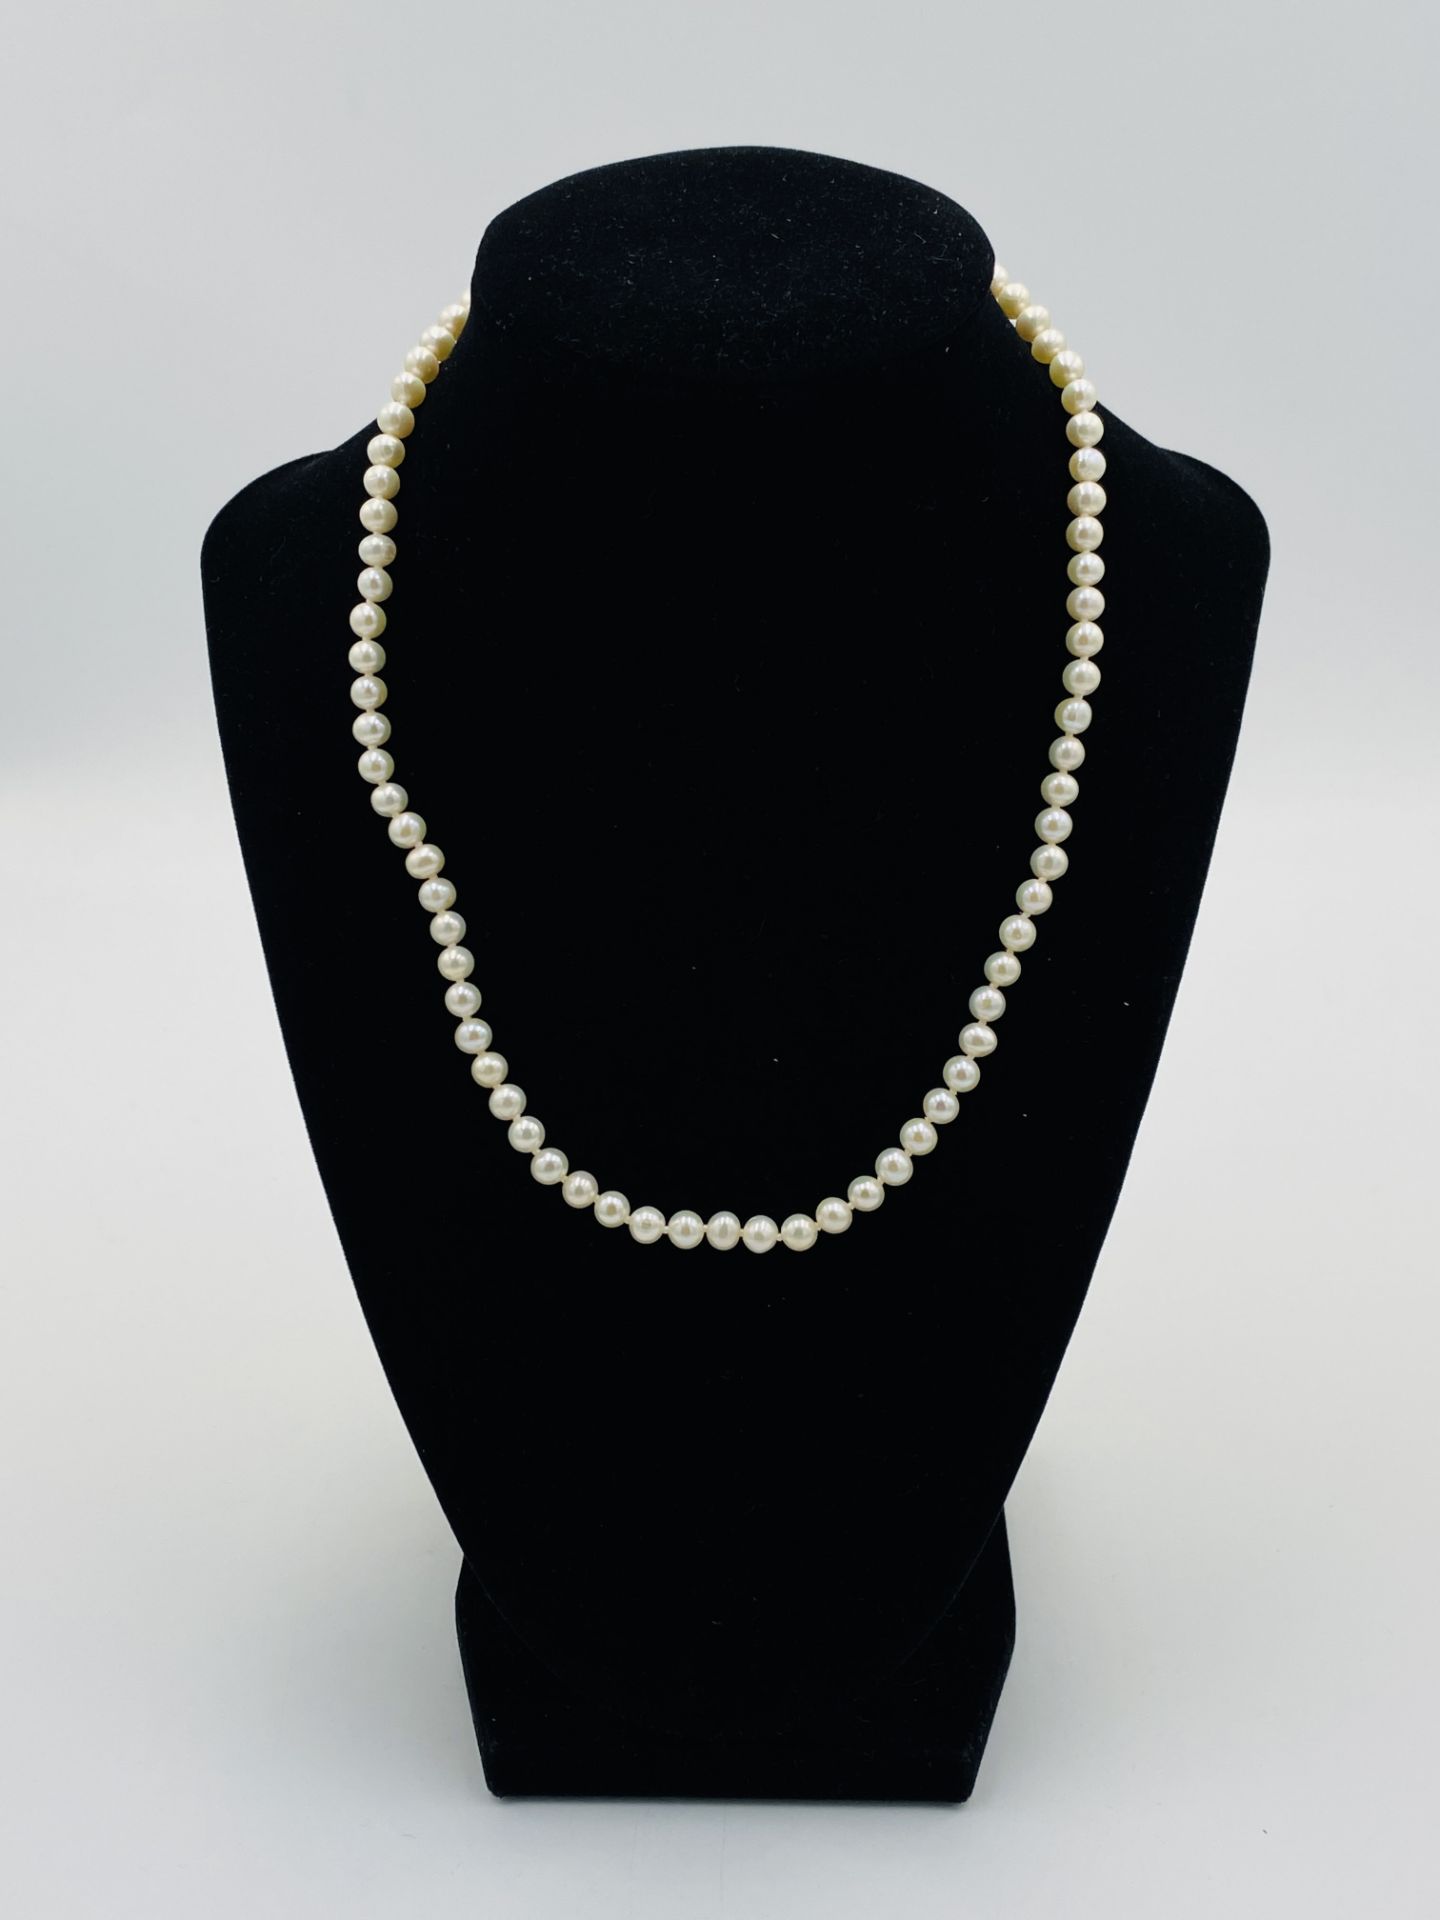 Pearl necklace with 9ct gold clasp - Image 2 of 4